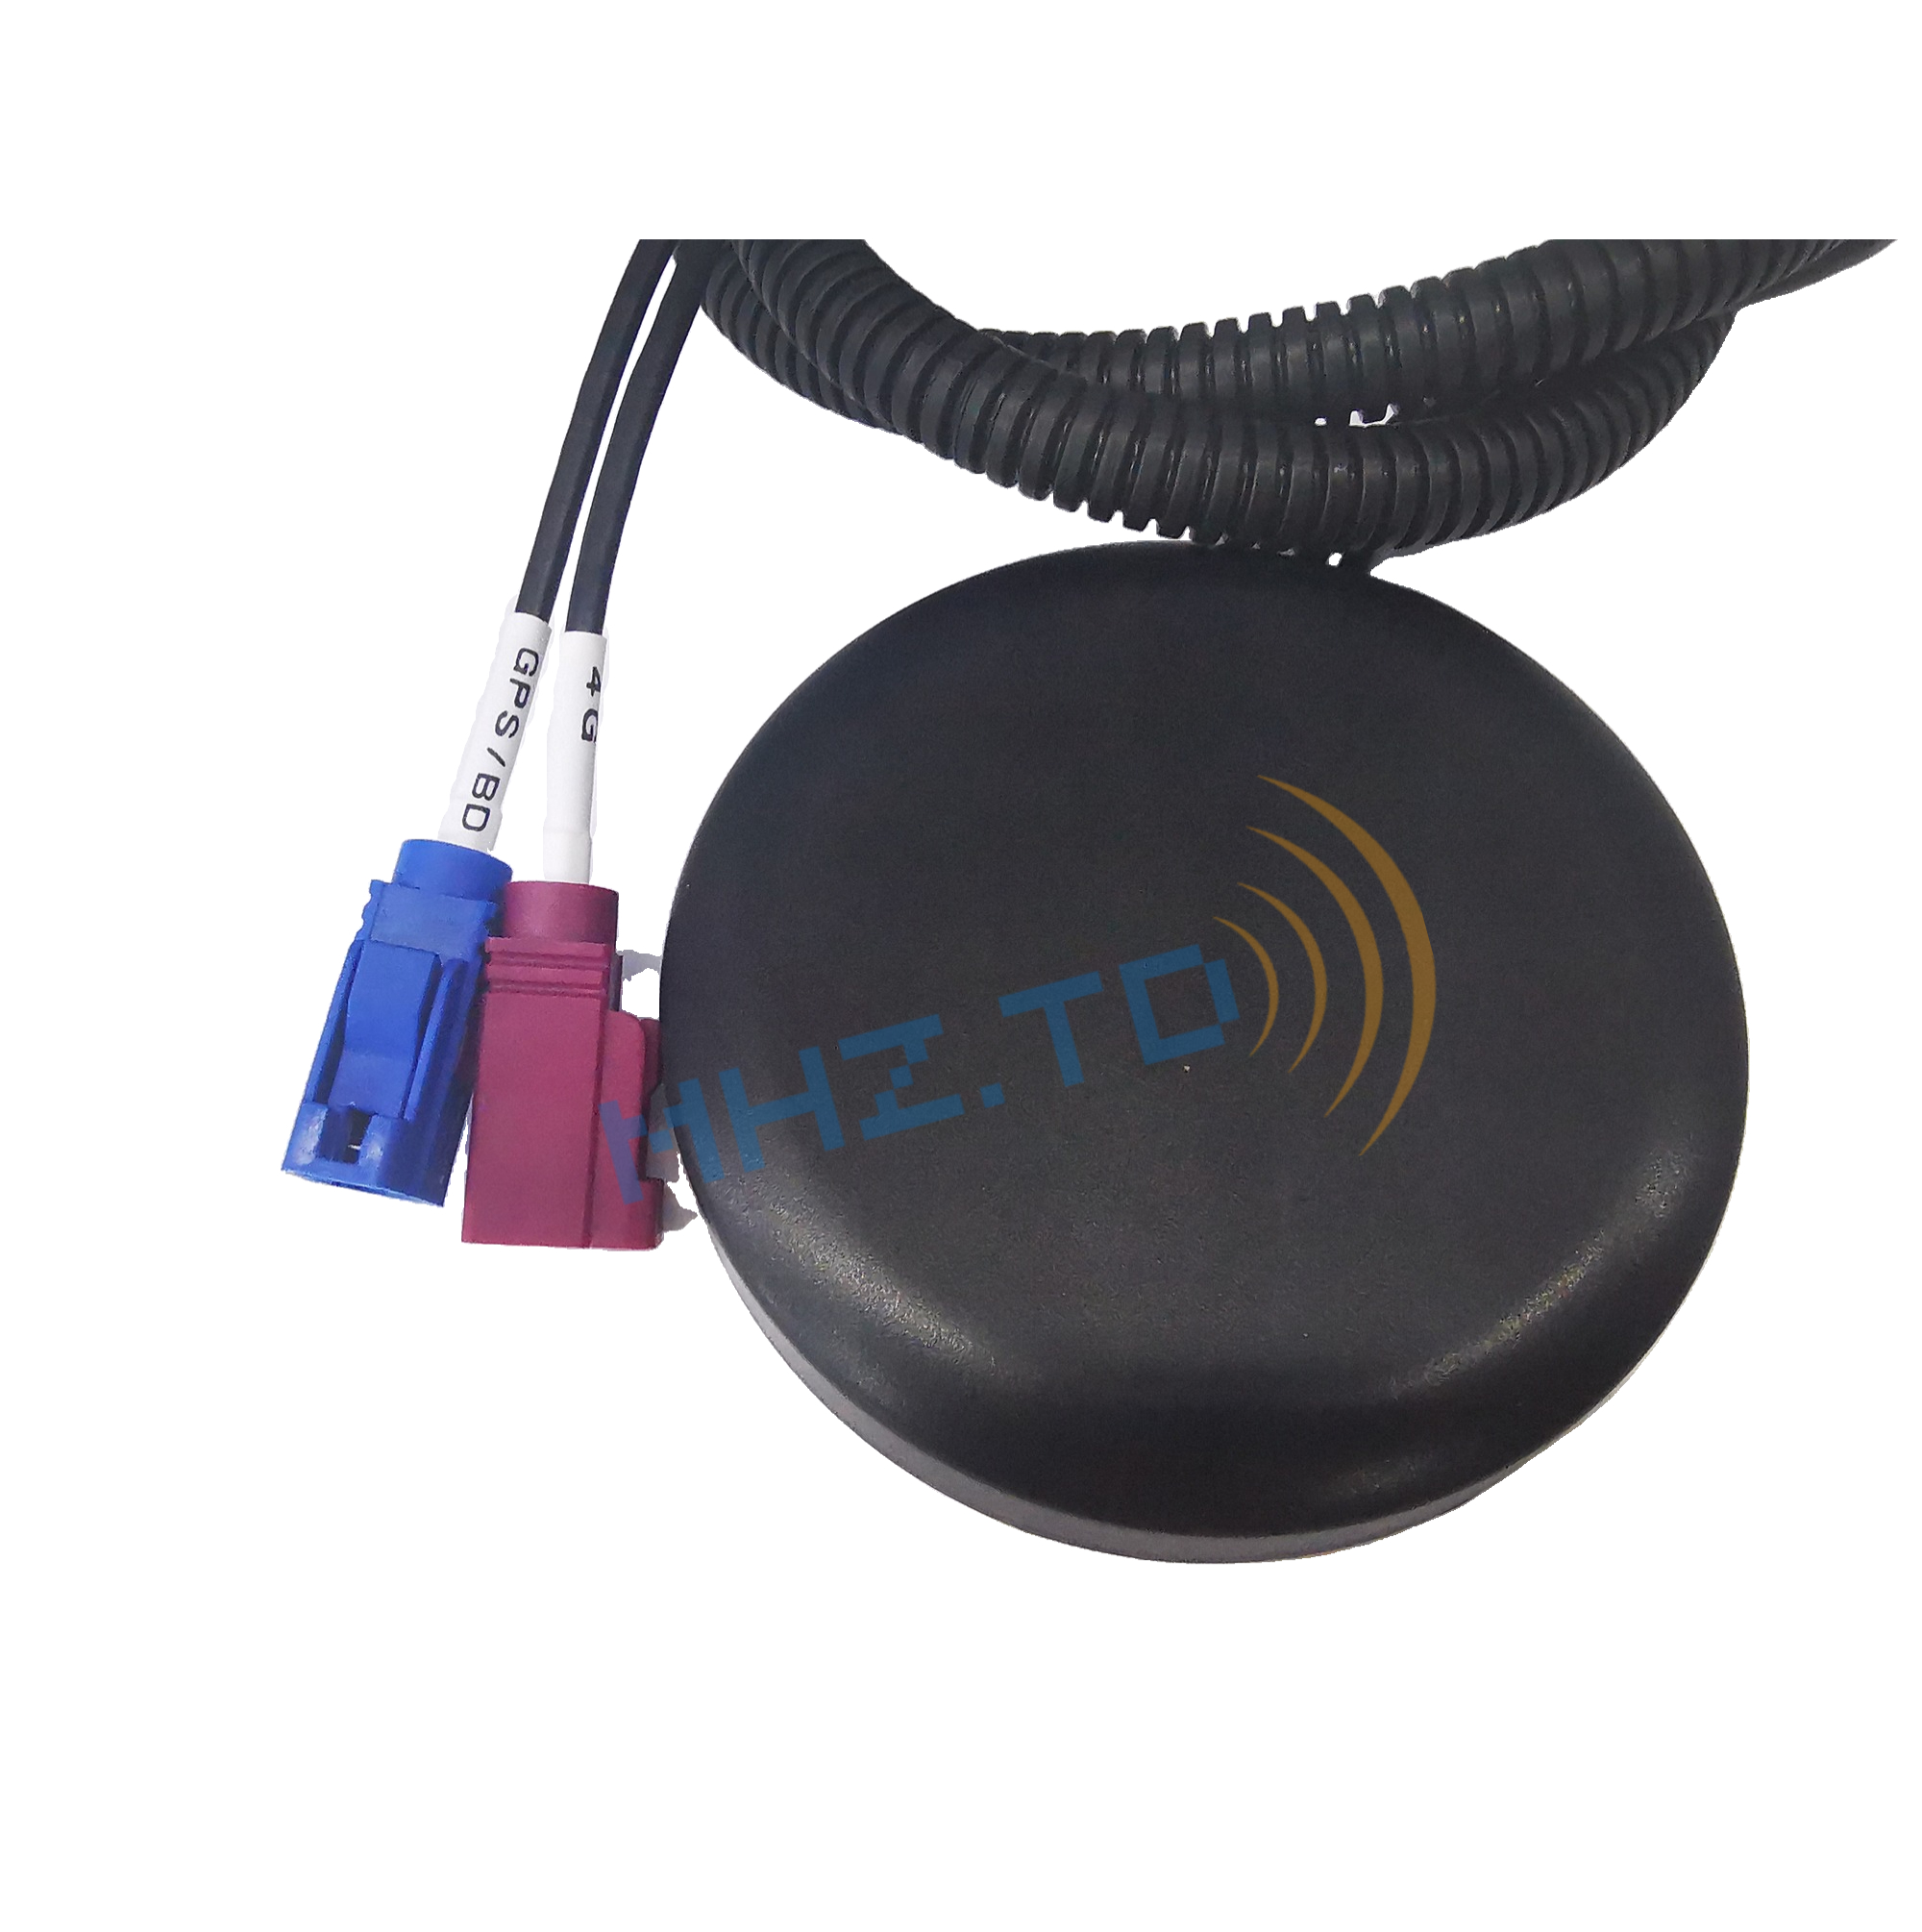 GPS and 4G LTE Quad Band Combo Antenna, Sticky Type. Flat housing for easy installation – MHZ.TD